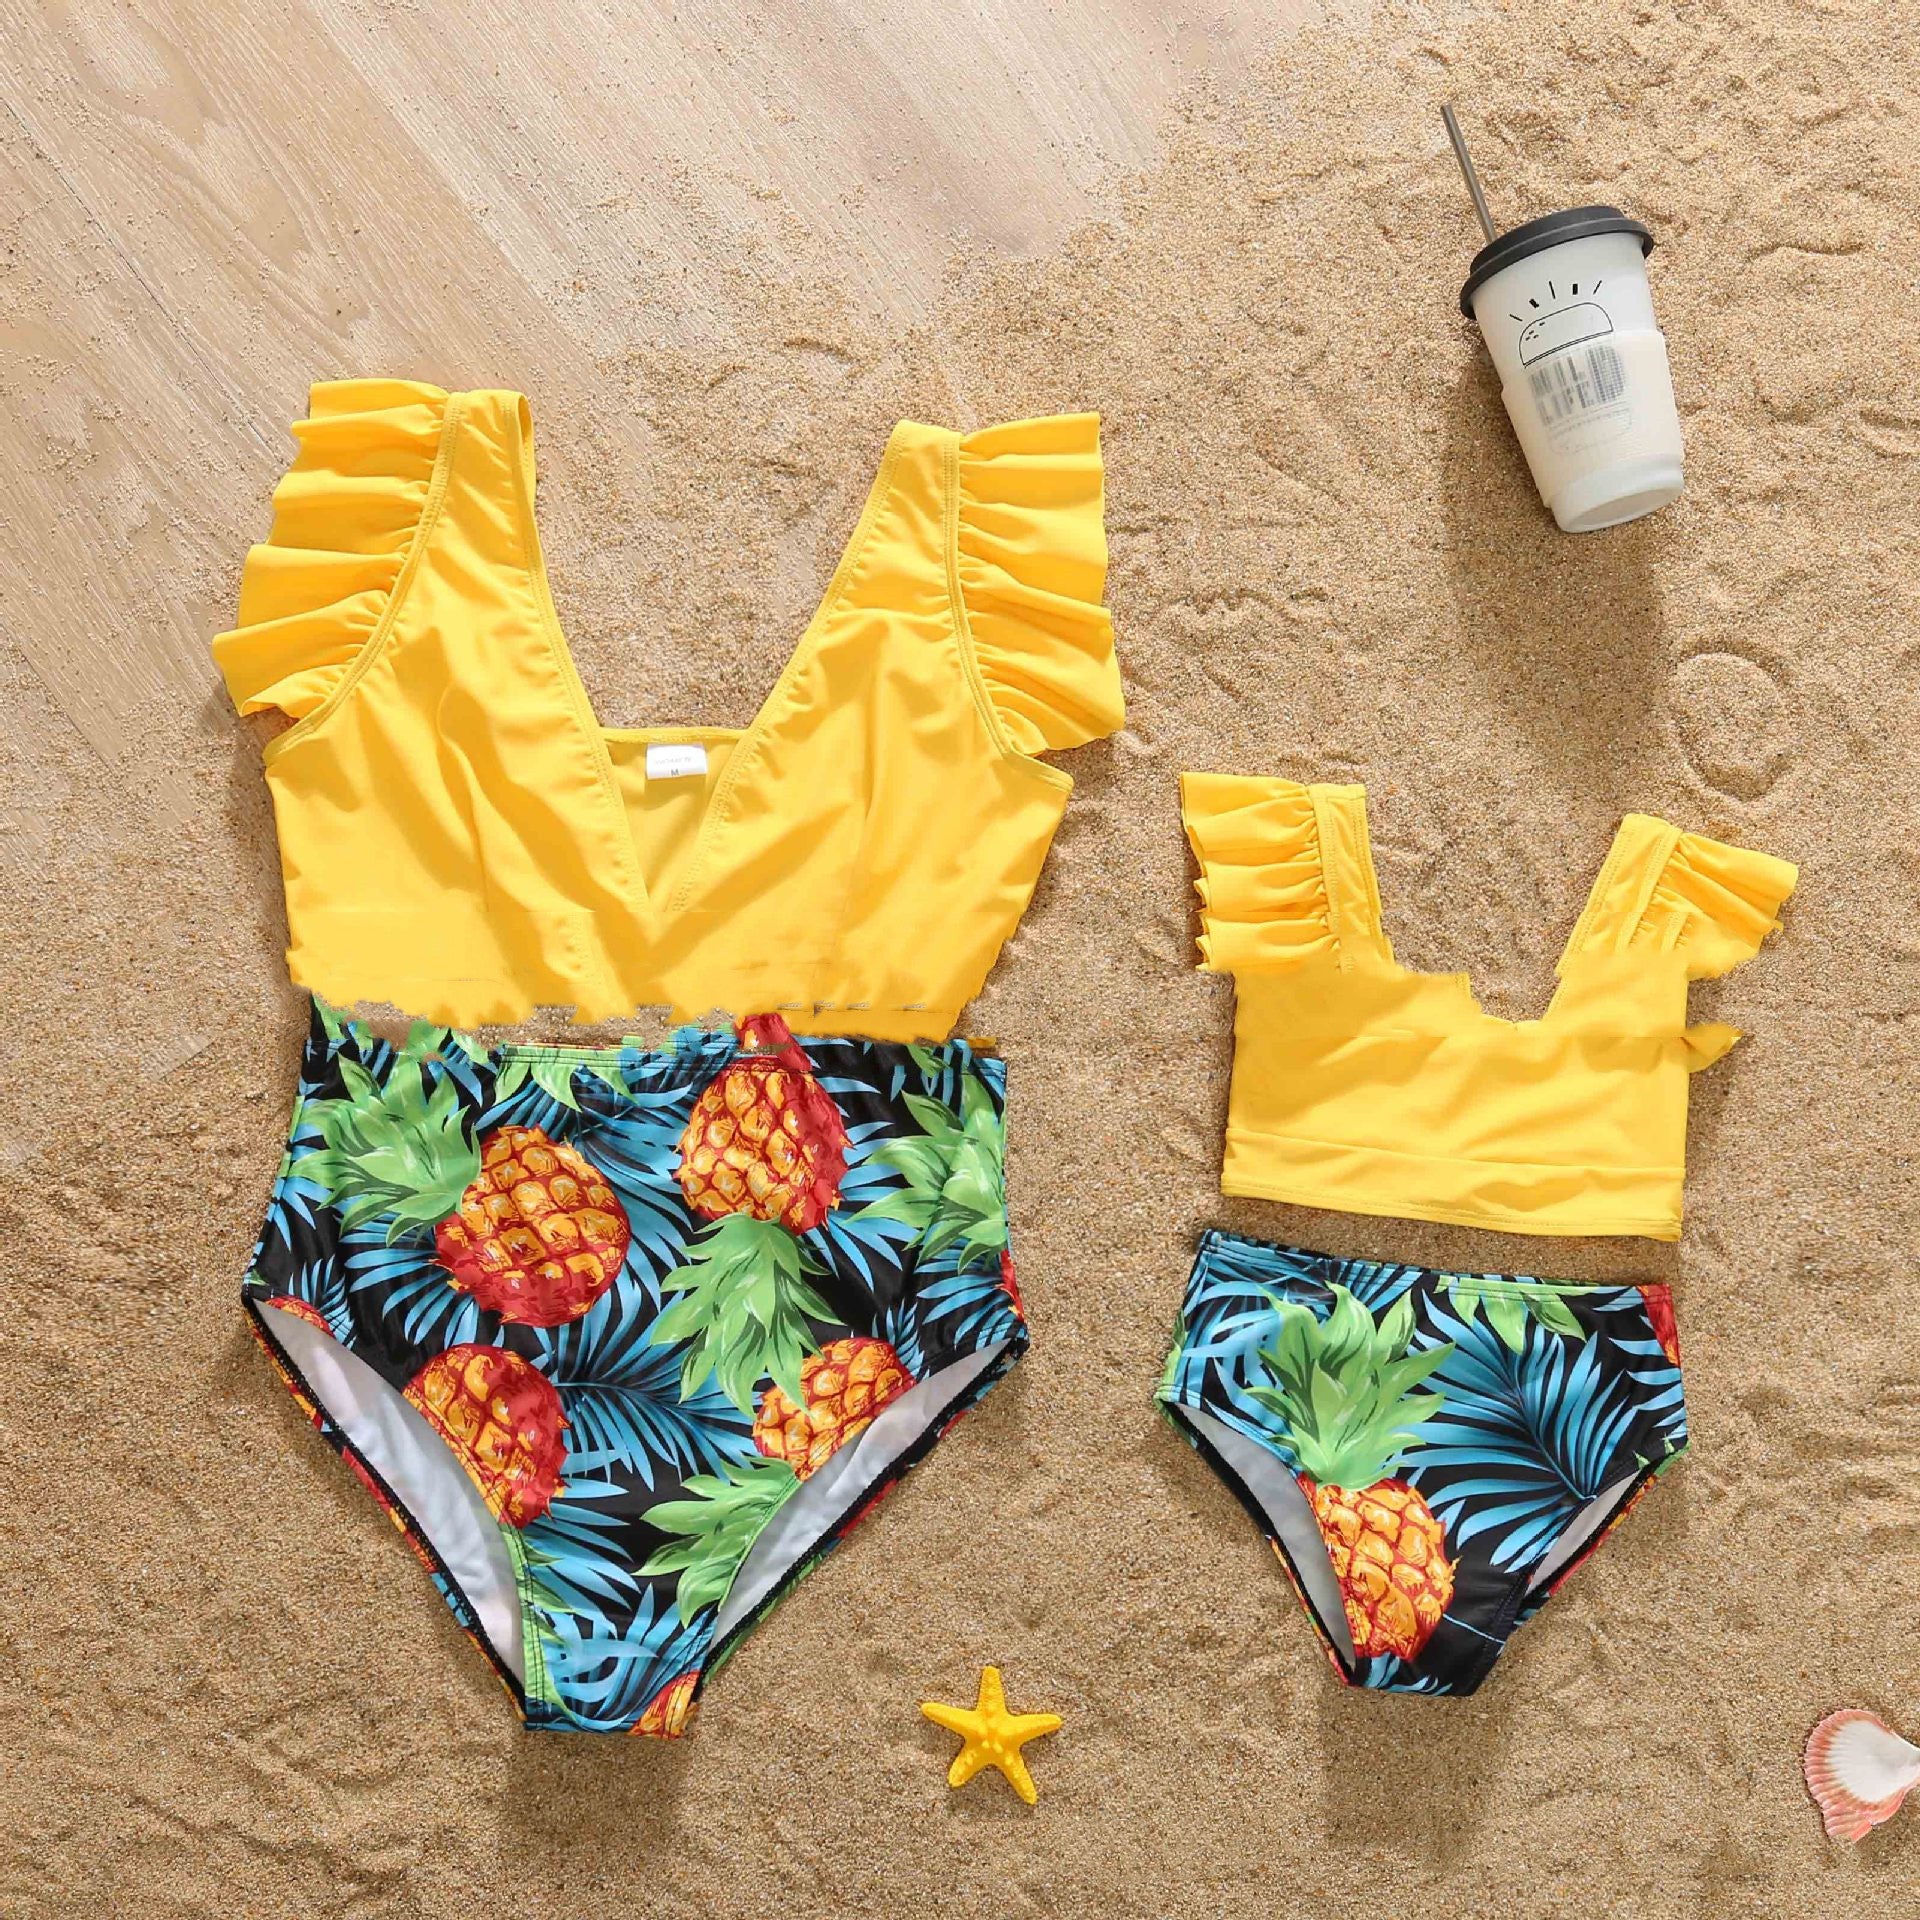 The New Vest Swimsuit Is Beautiful And Thin Parent-Child Family Swimsuit